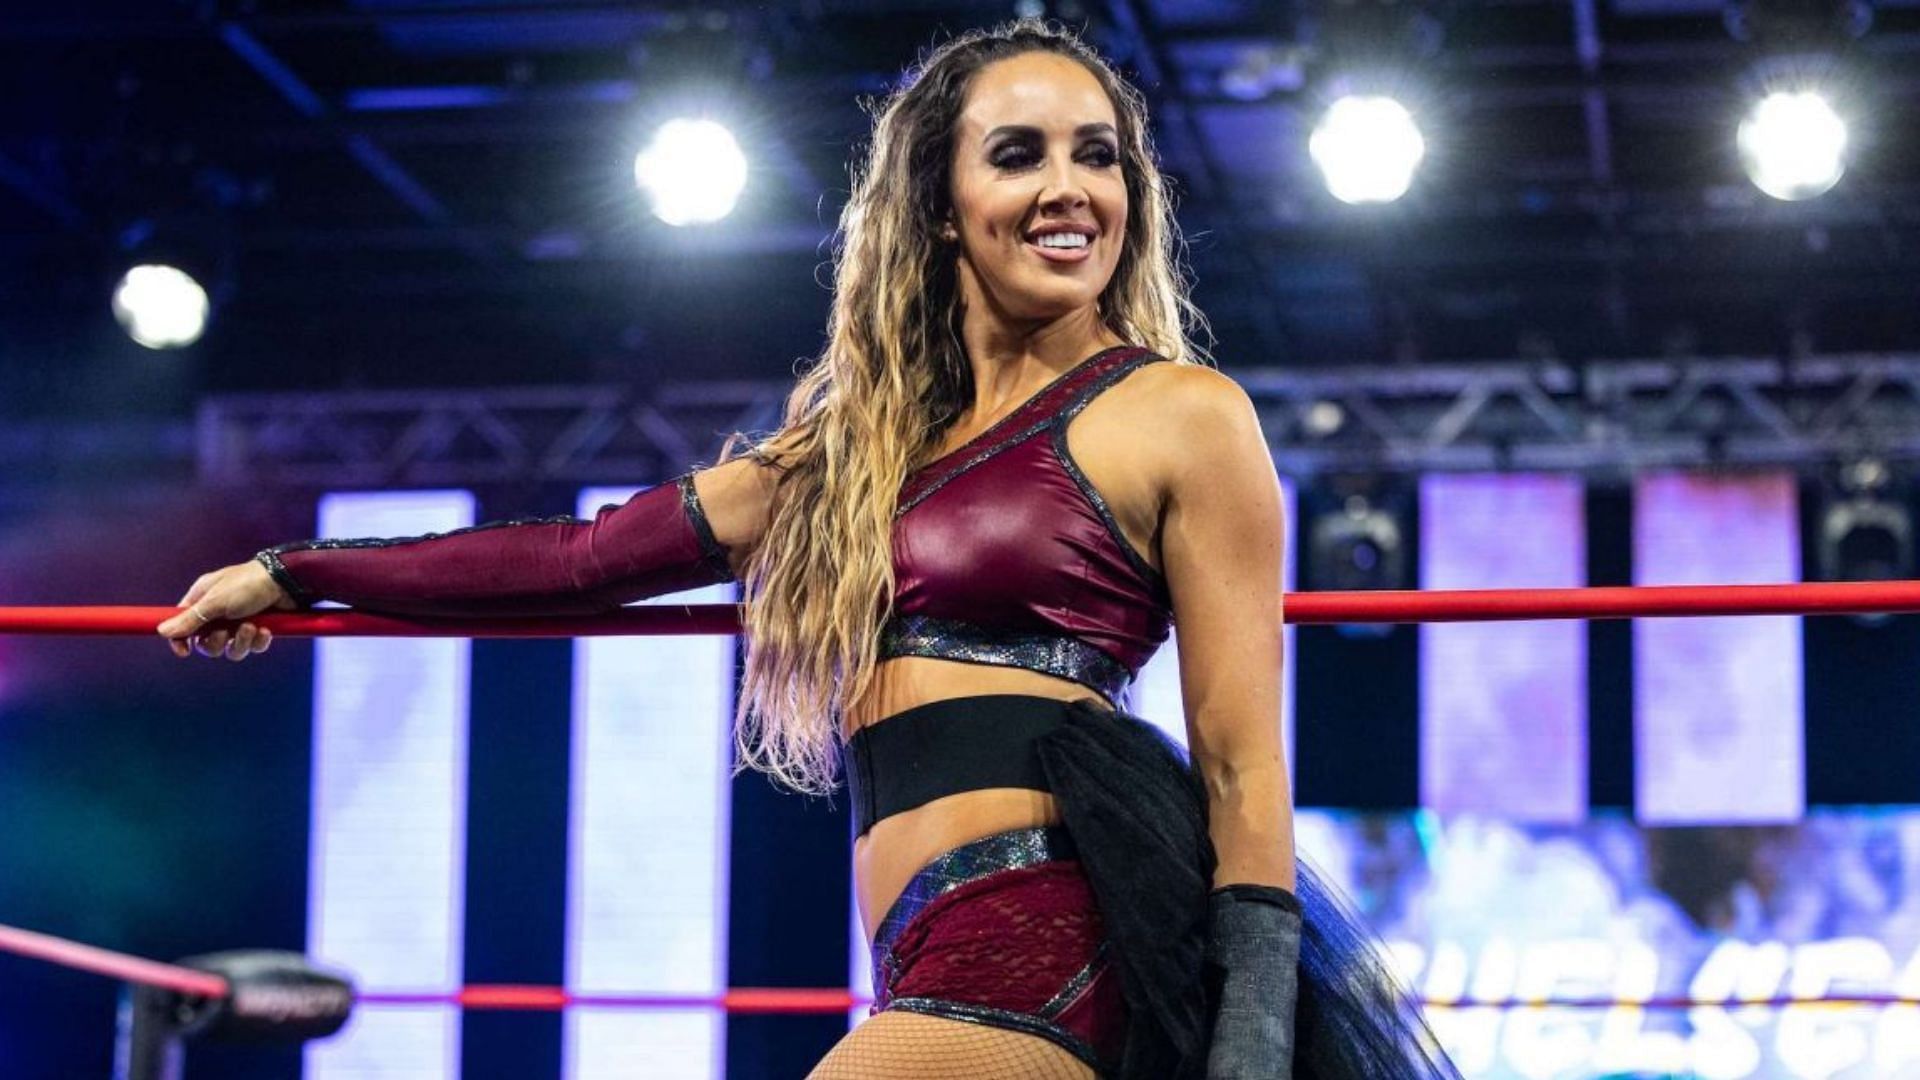 Chelsea Green is a member of the RAW roster